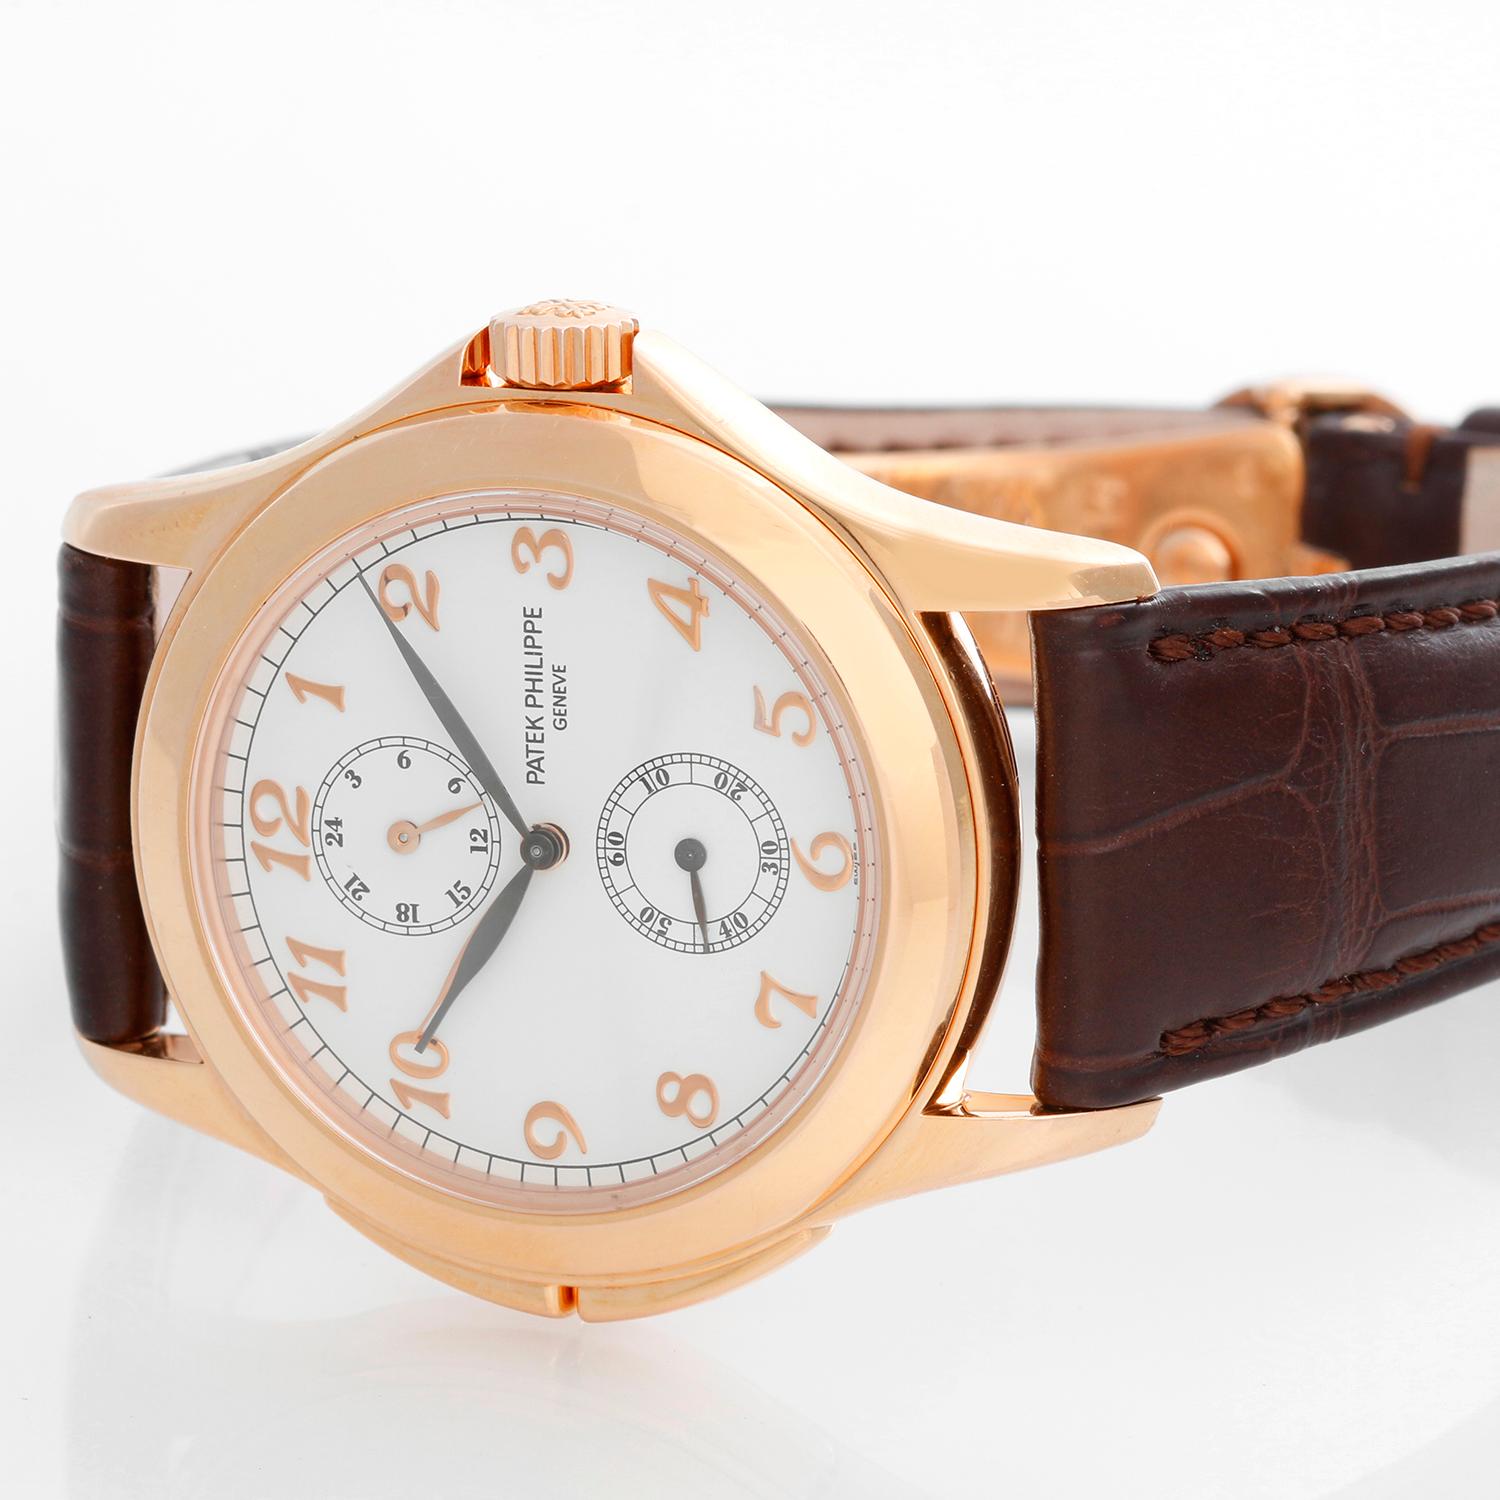 Collectible Patek Philippe Travel Time Men's 18k Rose Gold Watch 5134 R or 5134R - Manual winding; dual time. 18k rose gold case with exposition back (36mm diameter). White dial with rose gold Breguet numerals. Patek Philippe strap band; 18k rose 